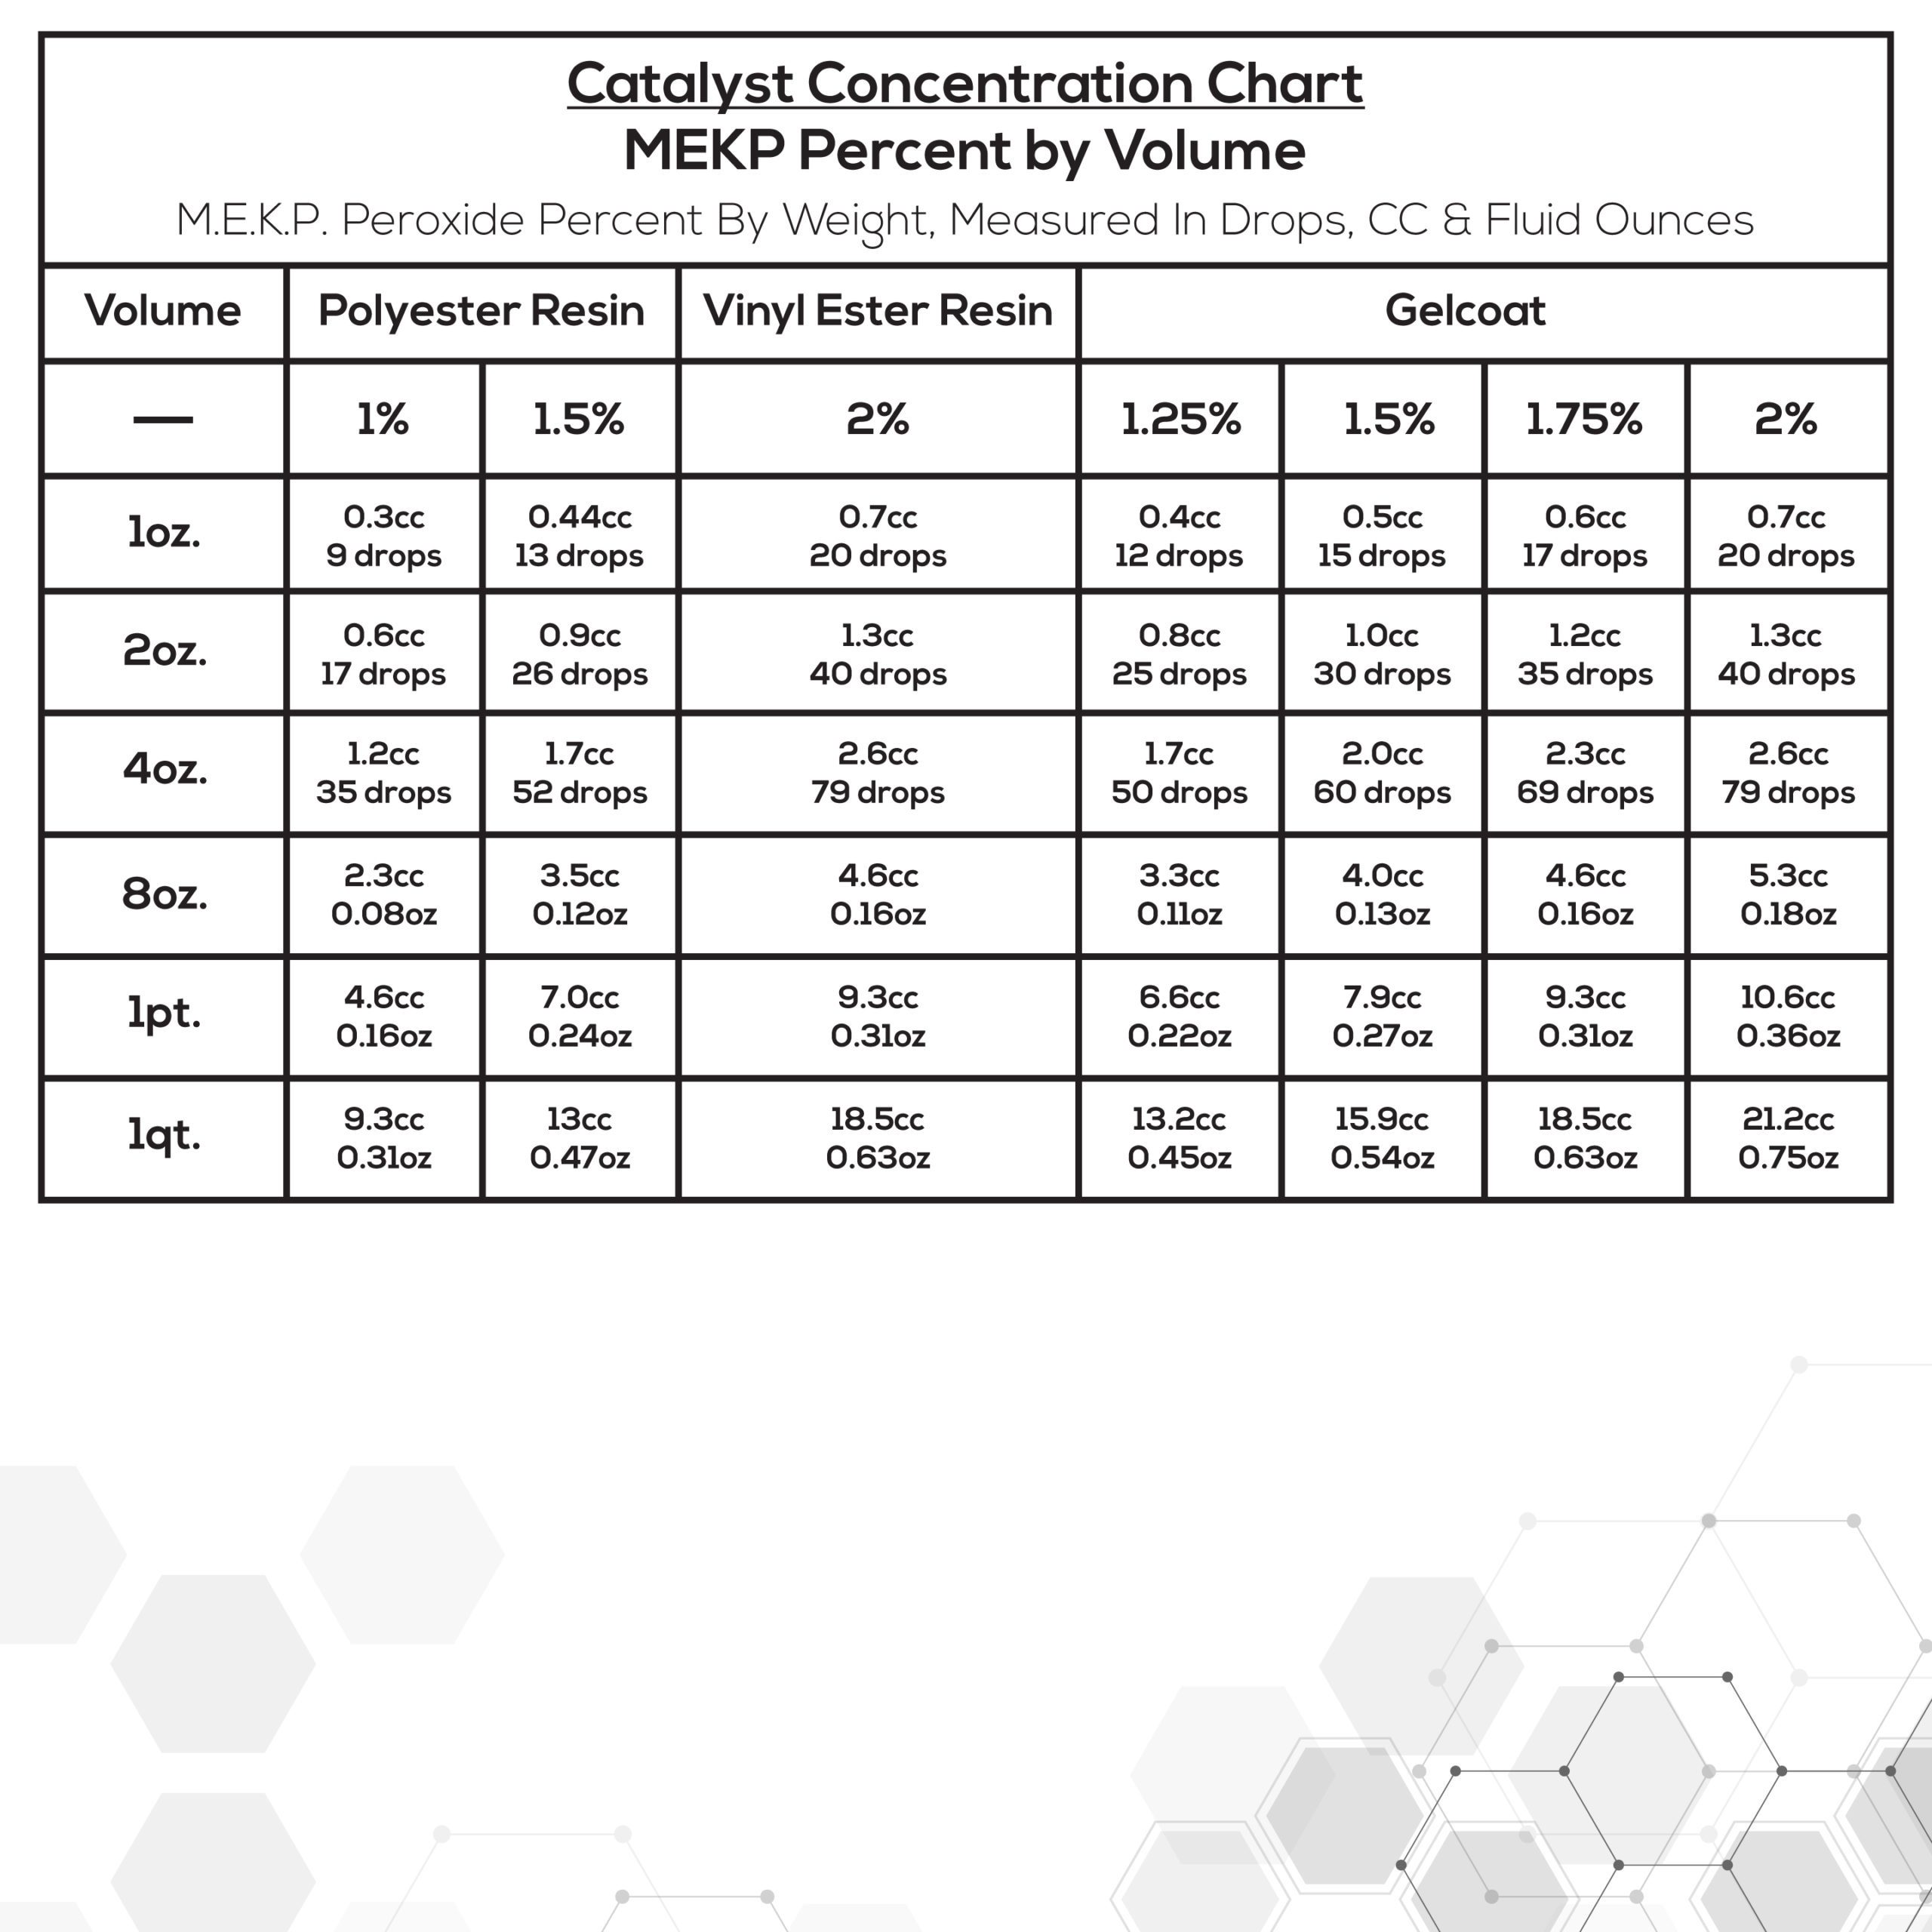 Catalyst Concentration Chart - Resins and Gelcoat